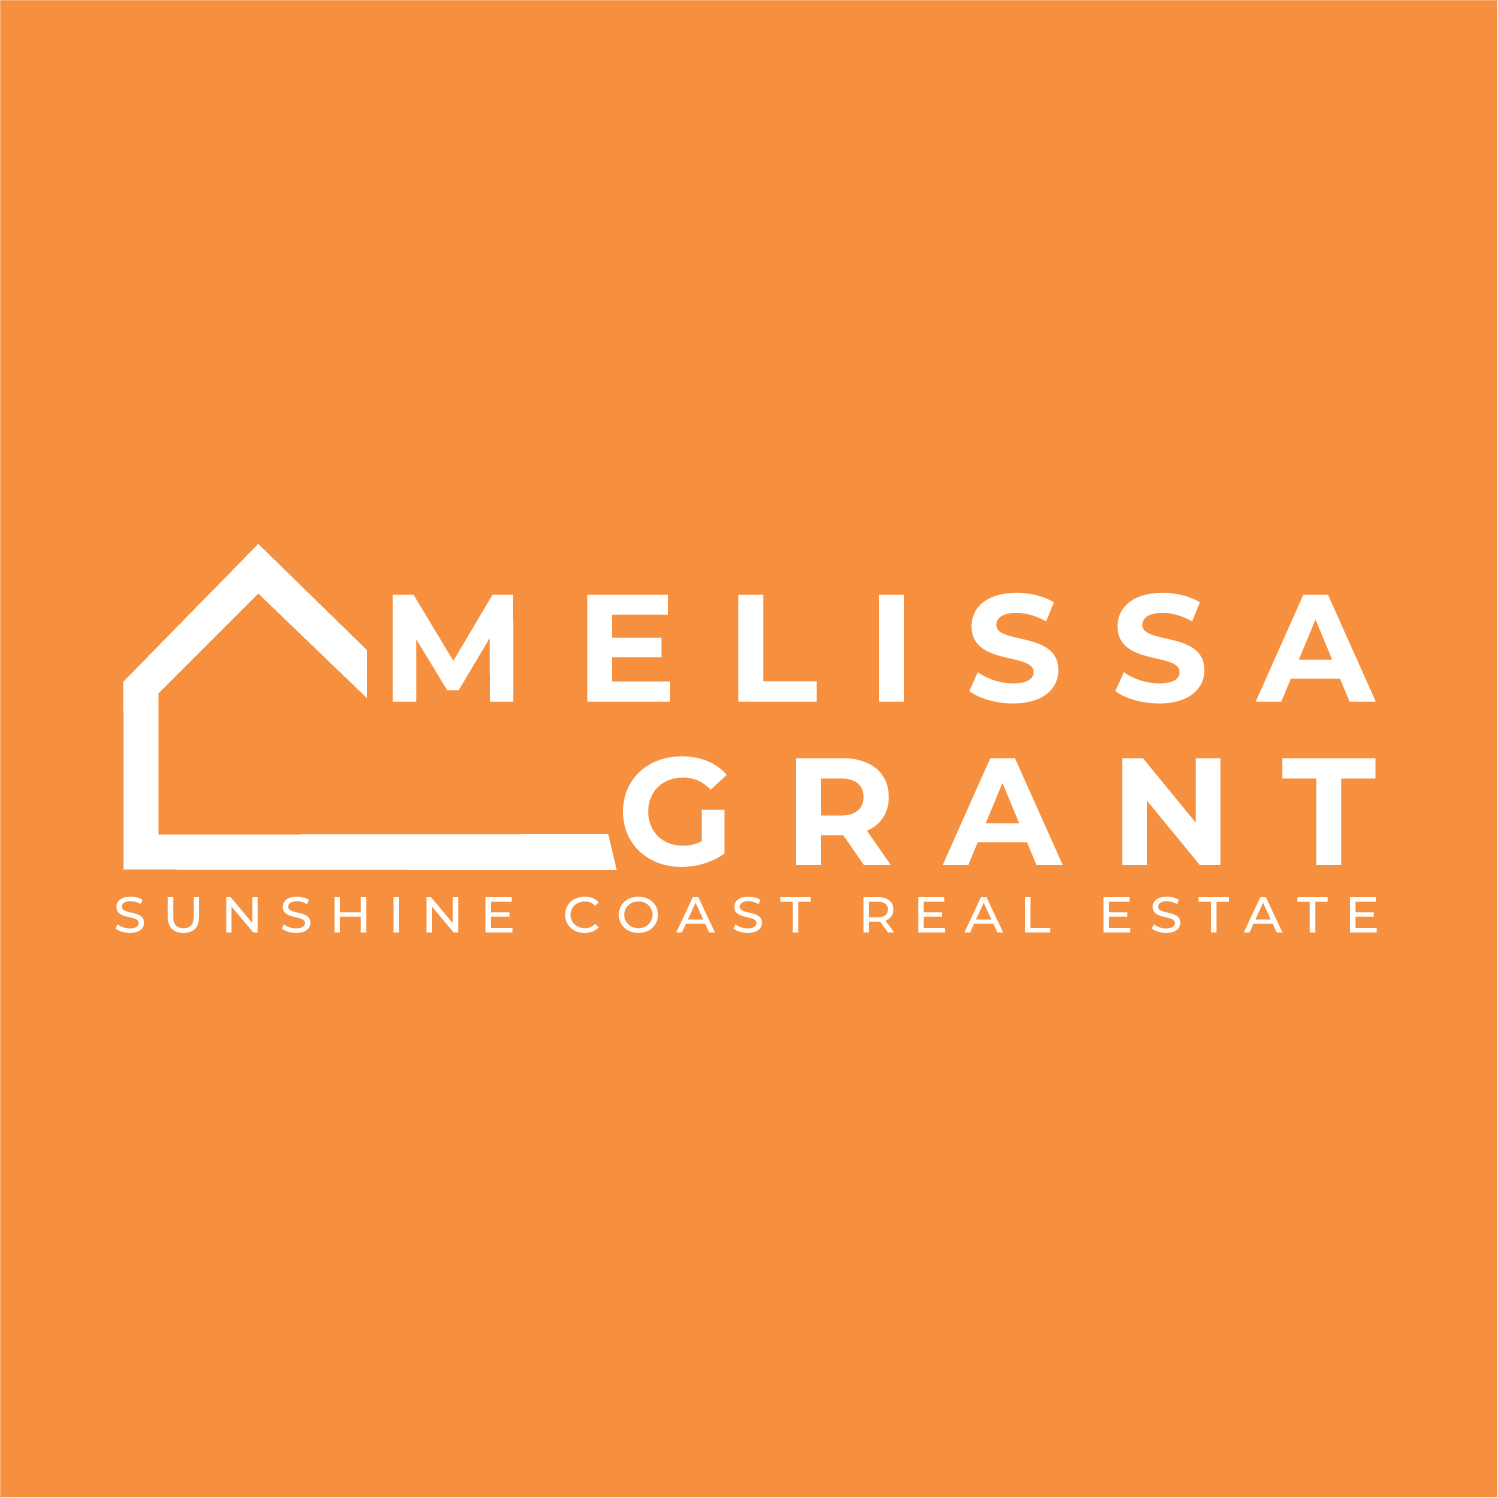 MELISSA GRANT by bl3nd design graphic design agency in abbotsford british columbia canada